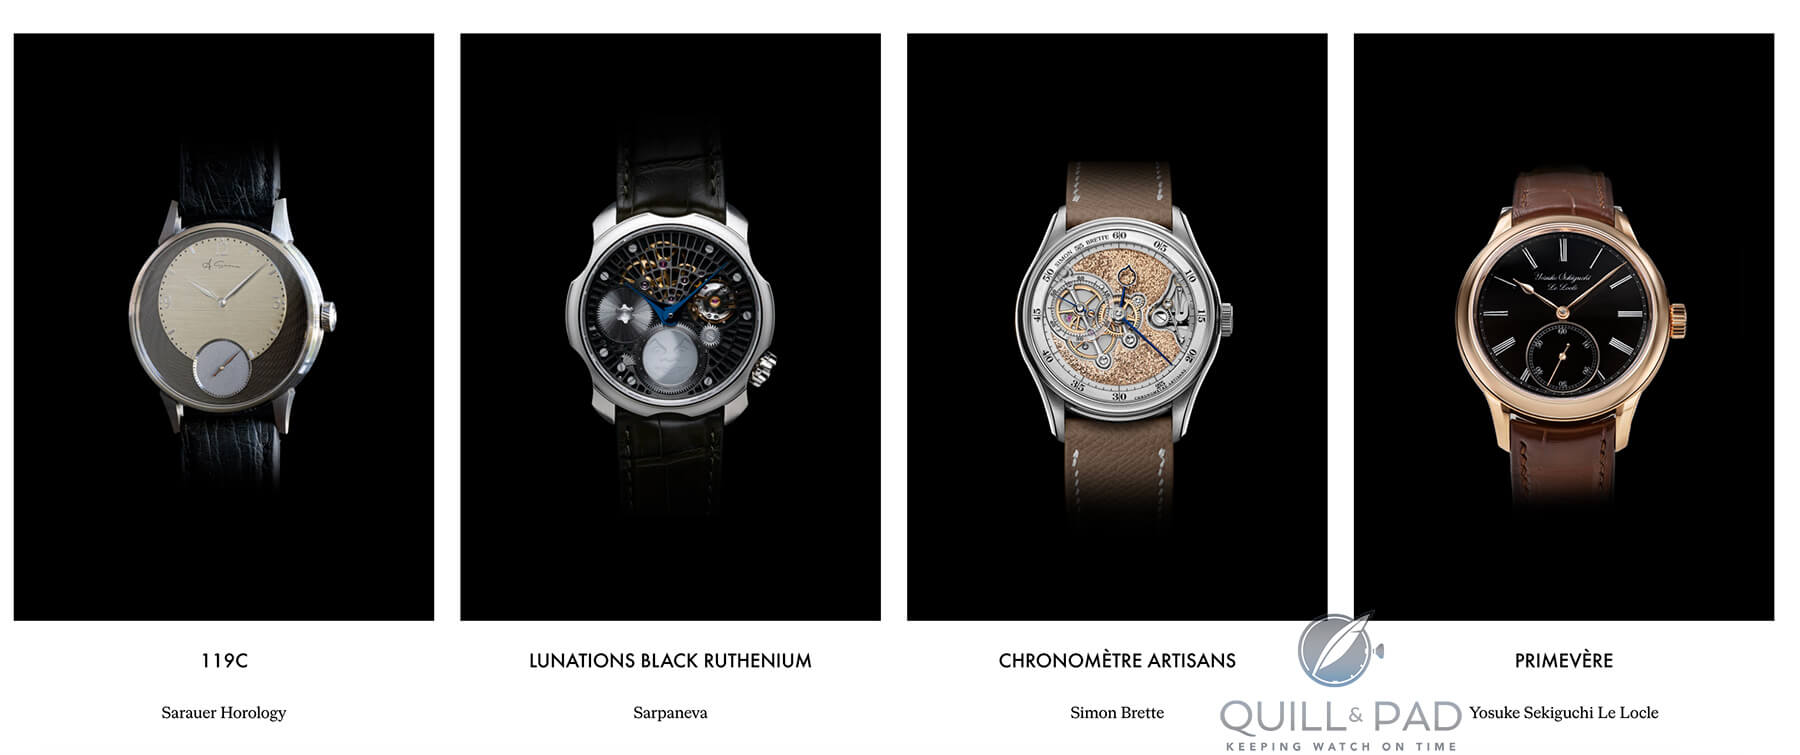 Louis Vuitton To Award A Watchmaking Prize And Mentorship